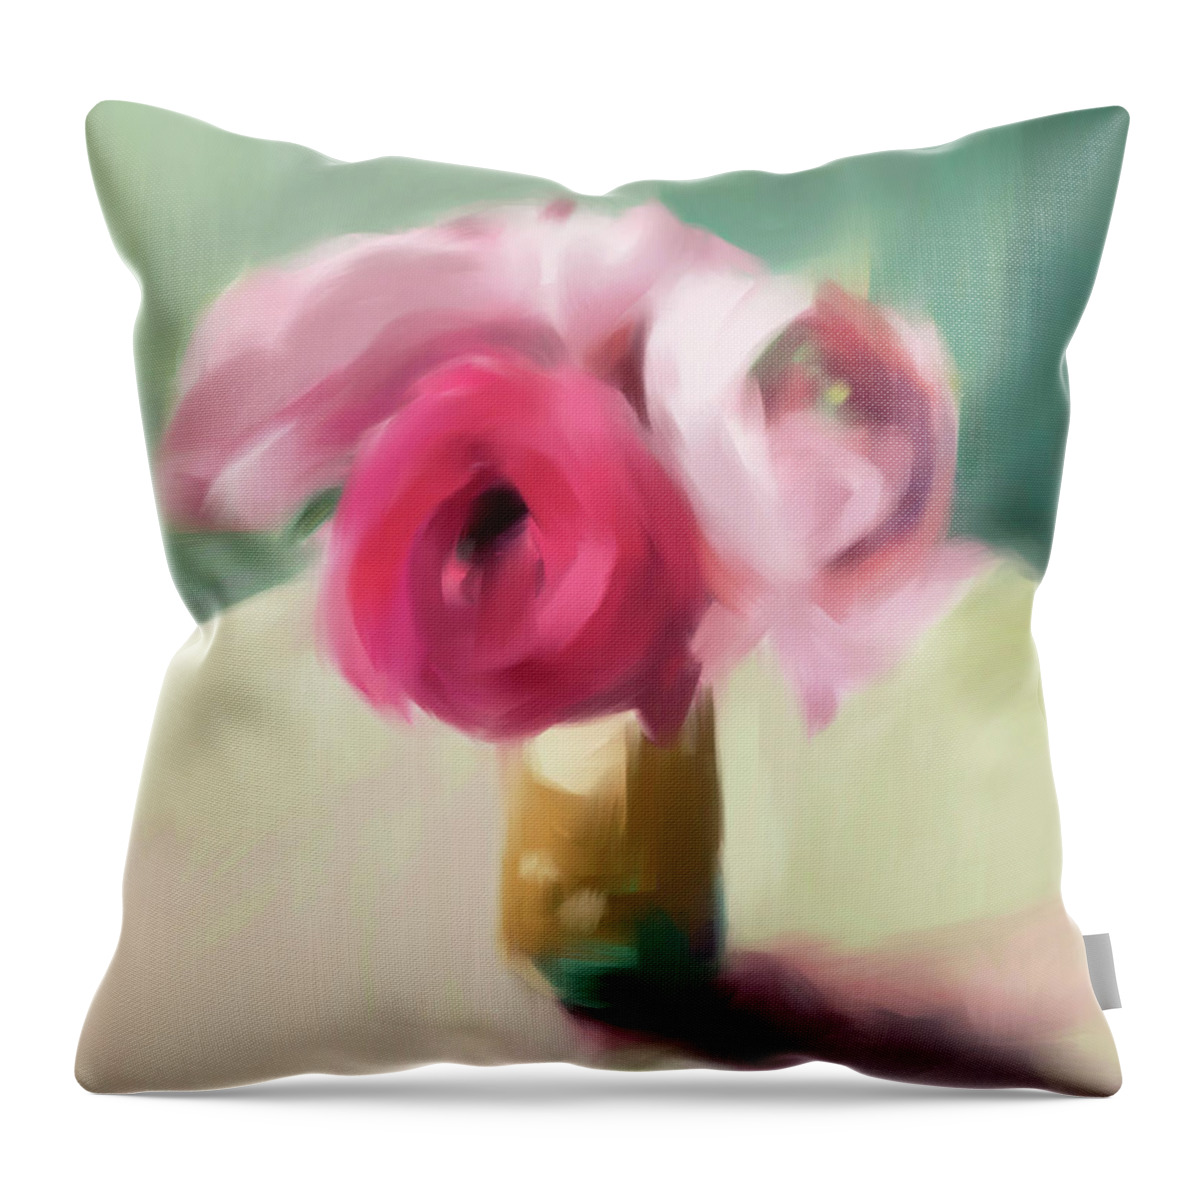 Floral Throw Pillow featuring the painting Tiny Pink Ranunculus Floral Art by Beverly Brown